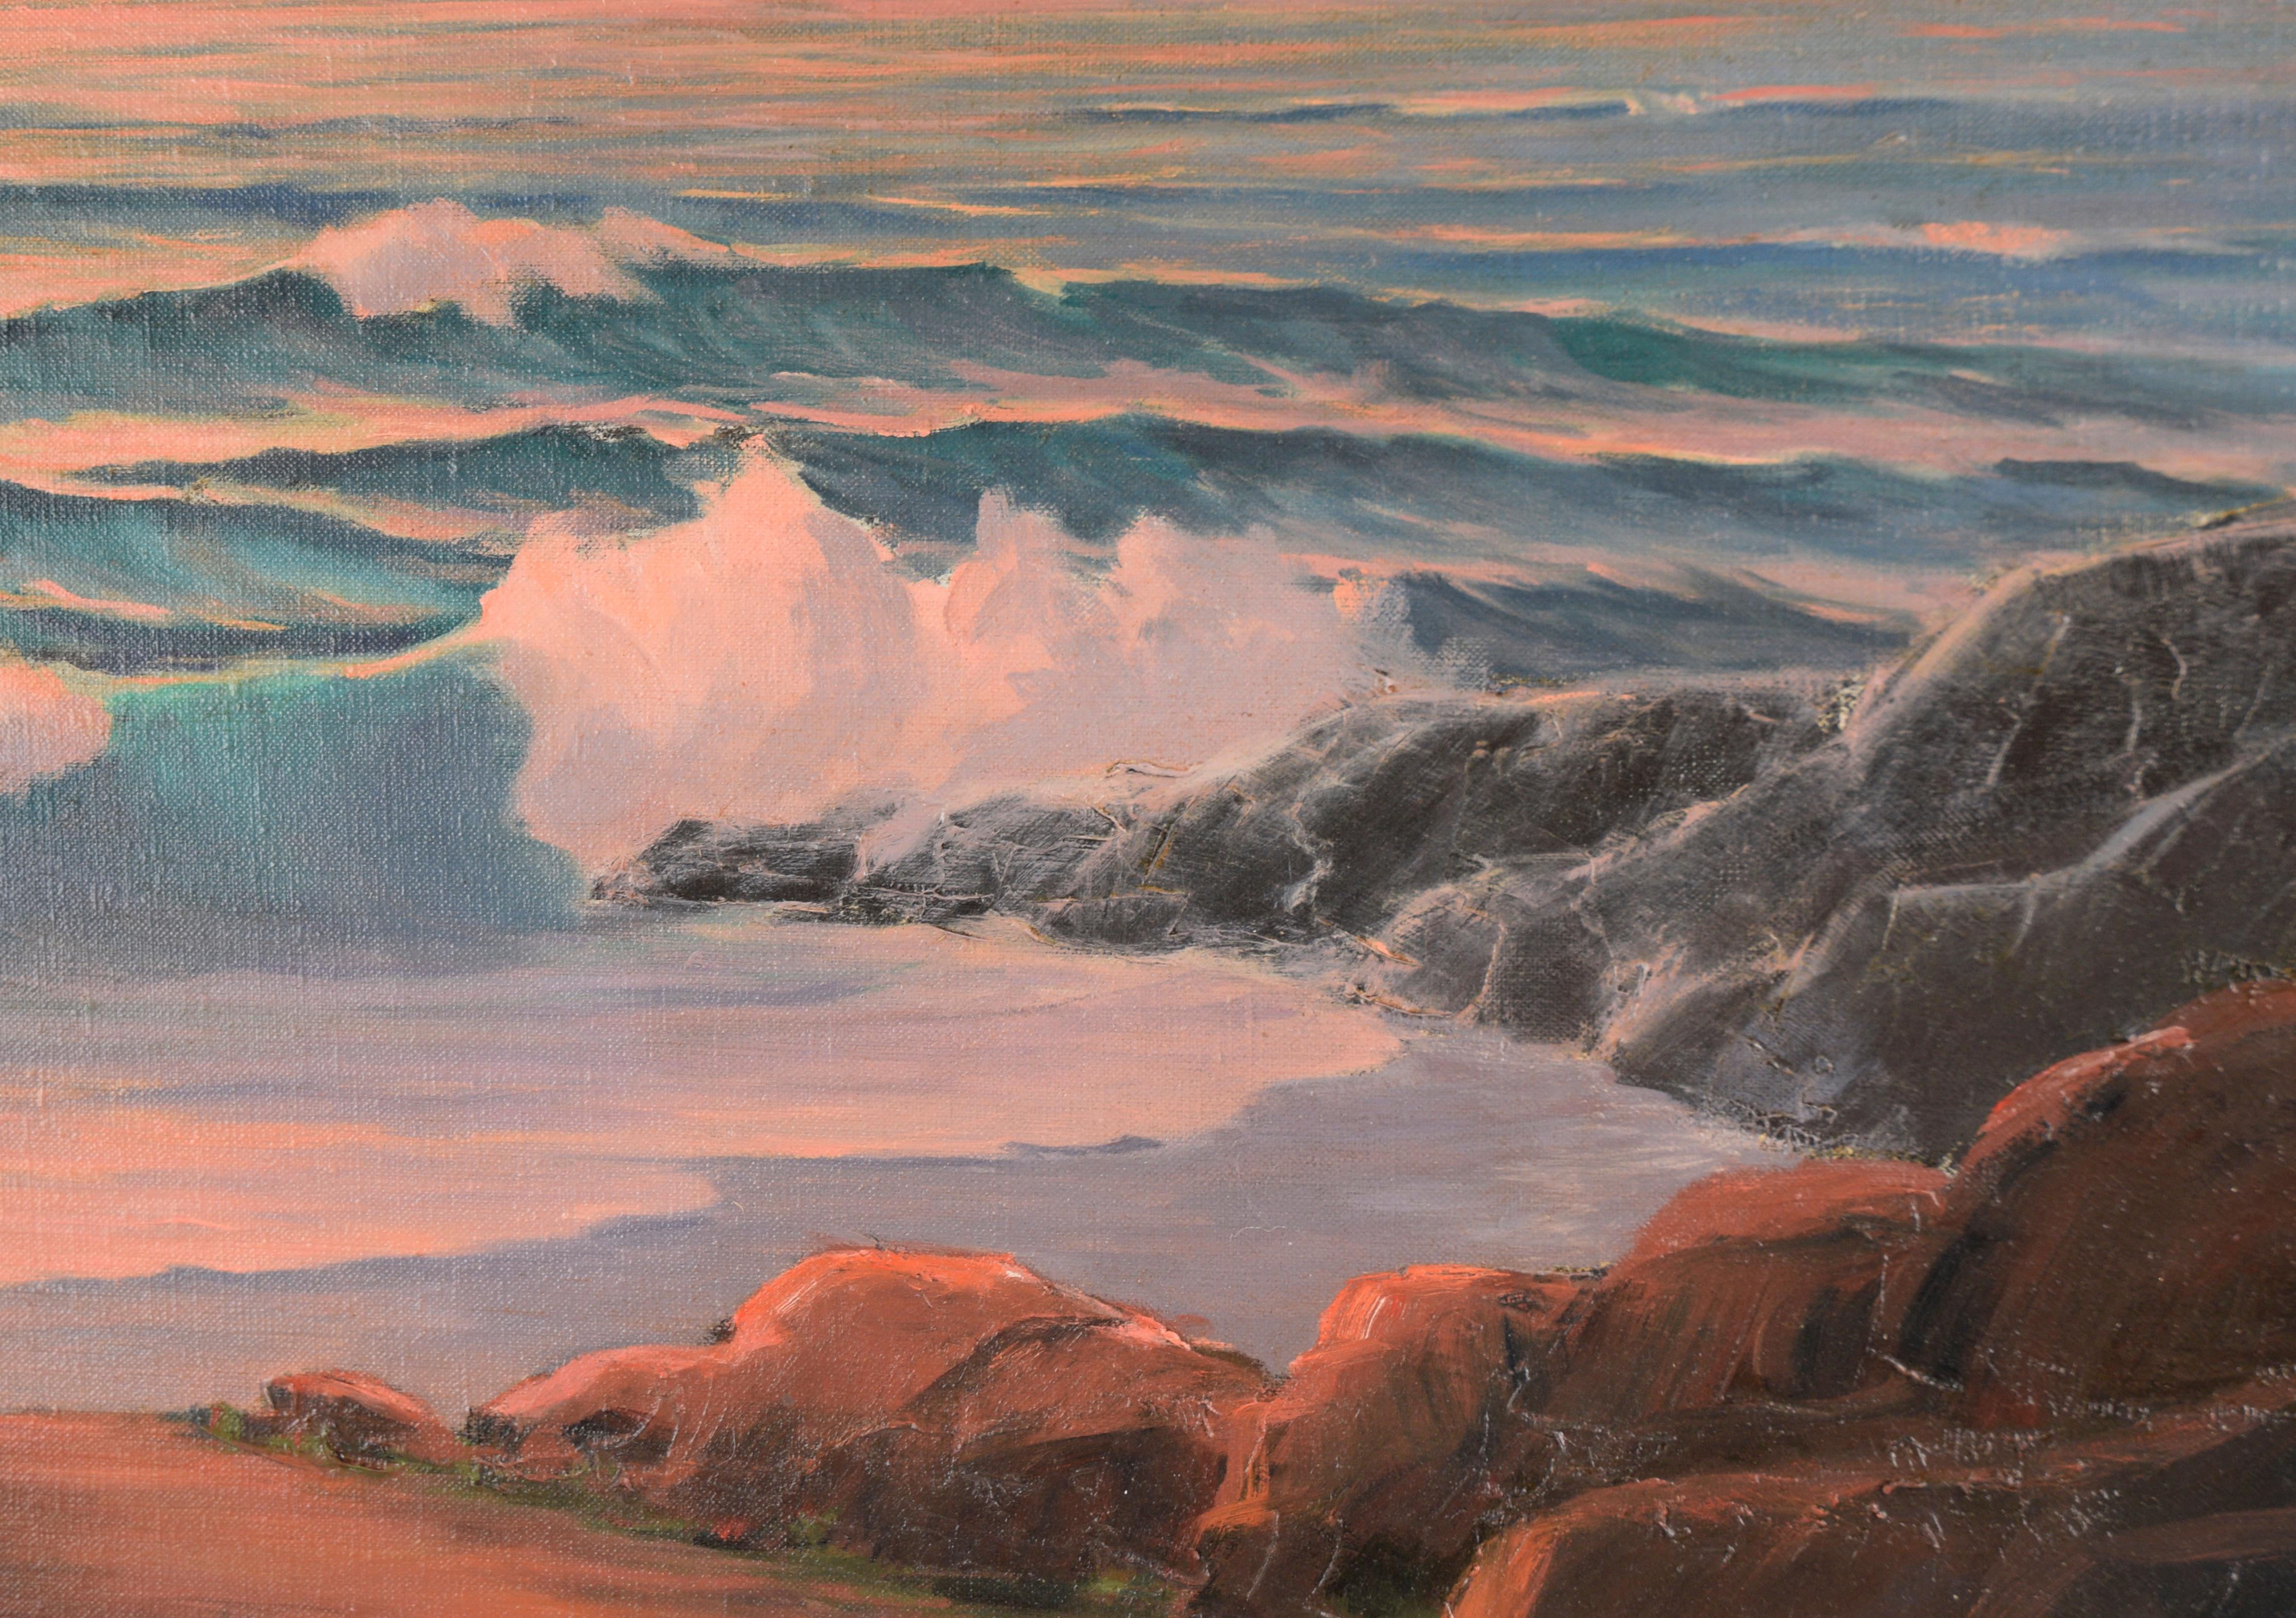 Vibrant seascape by Cecil F. Chamberlin (American, 1899 -1963), circa 1950. Signé en bas à droite. Presented in gilt-toned wood frame. Canvas size: 20